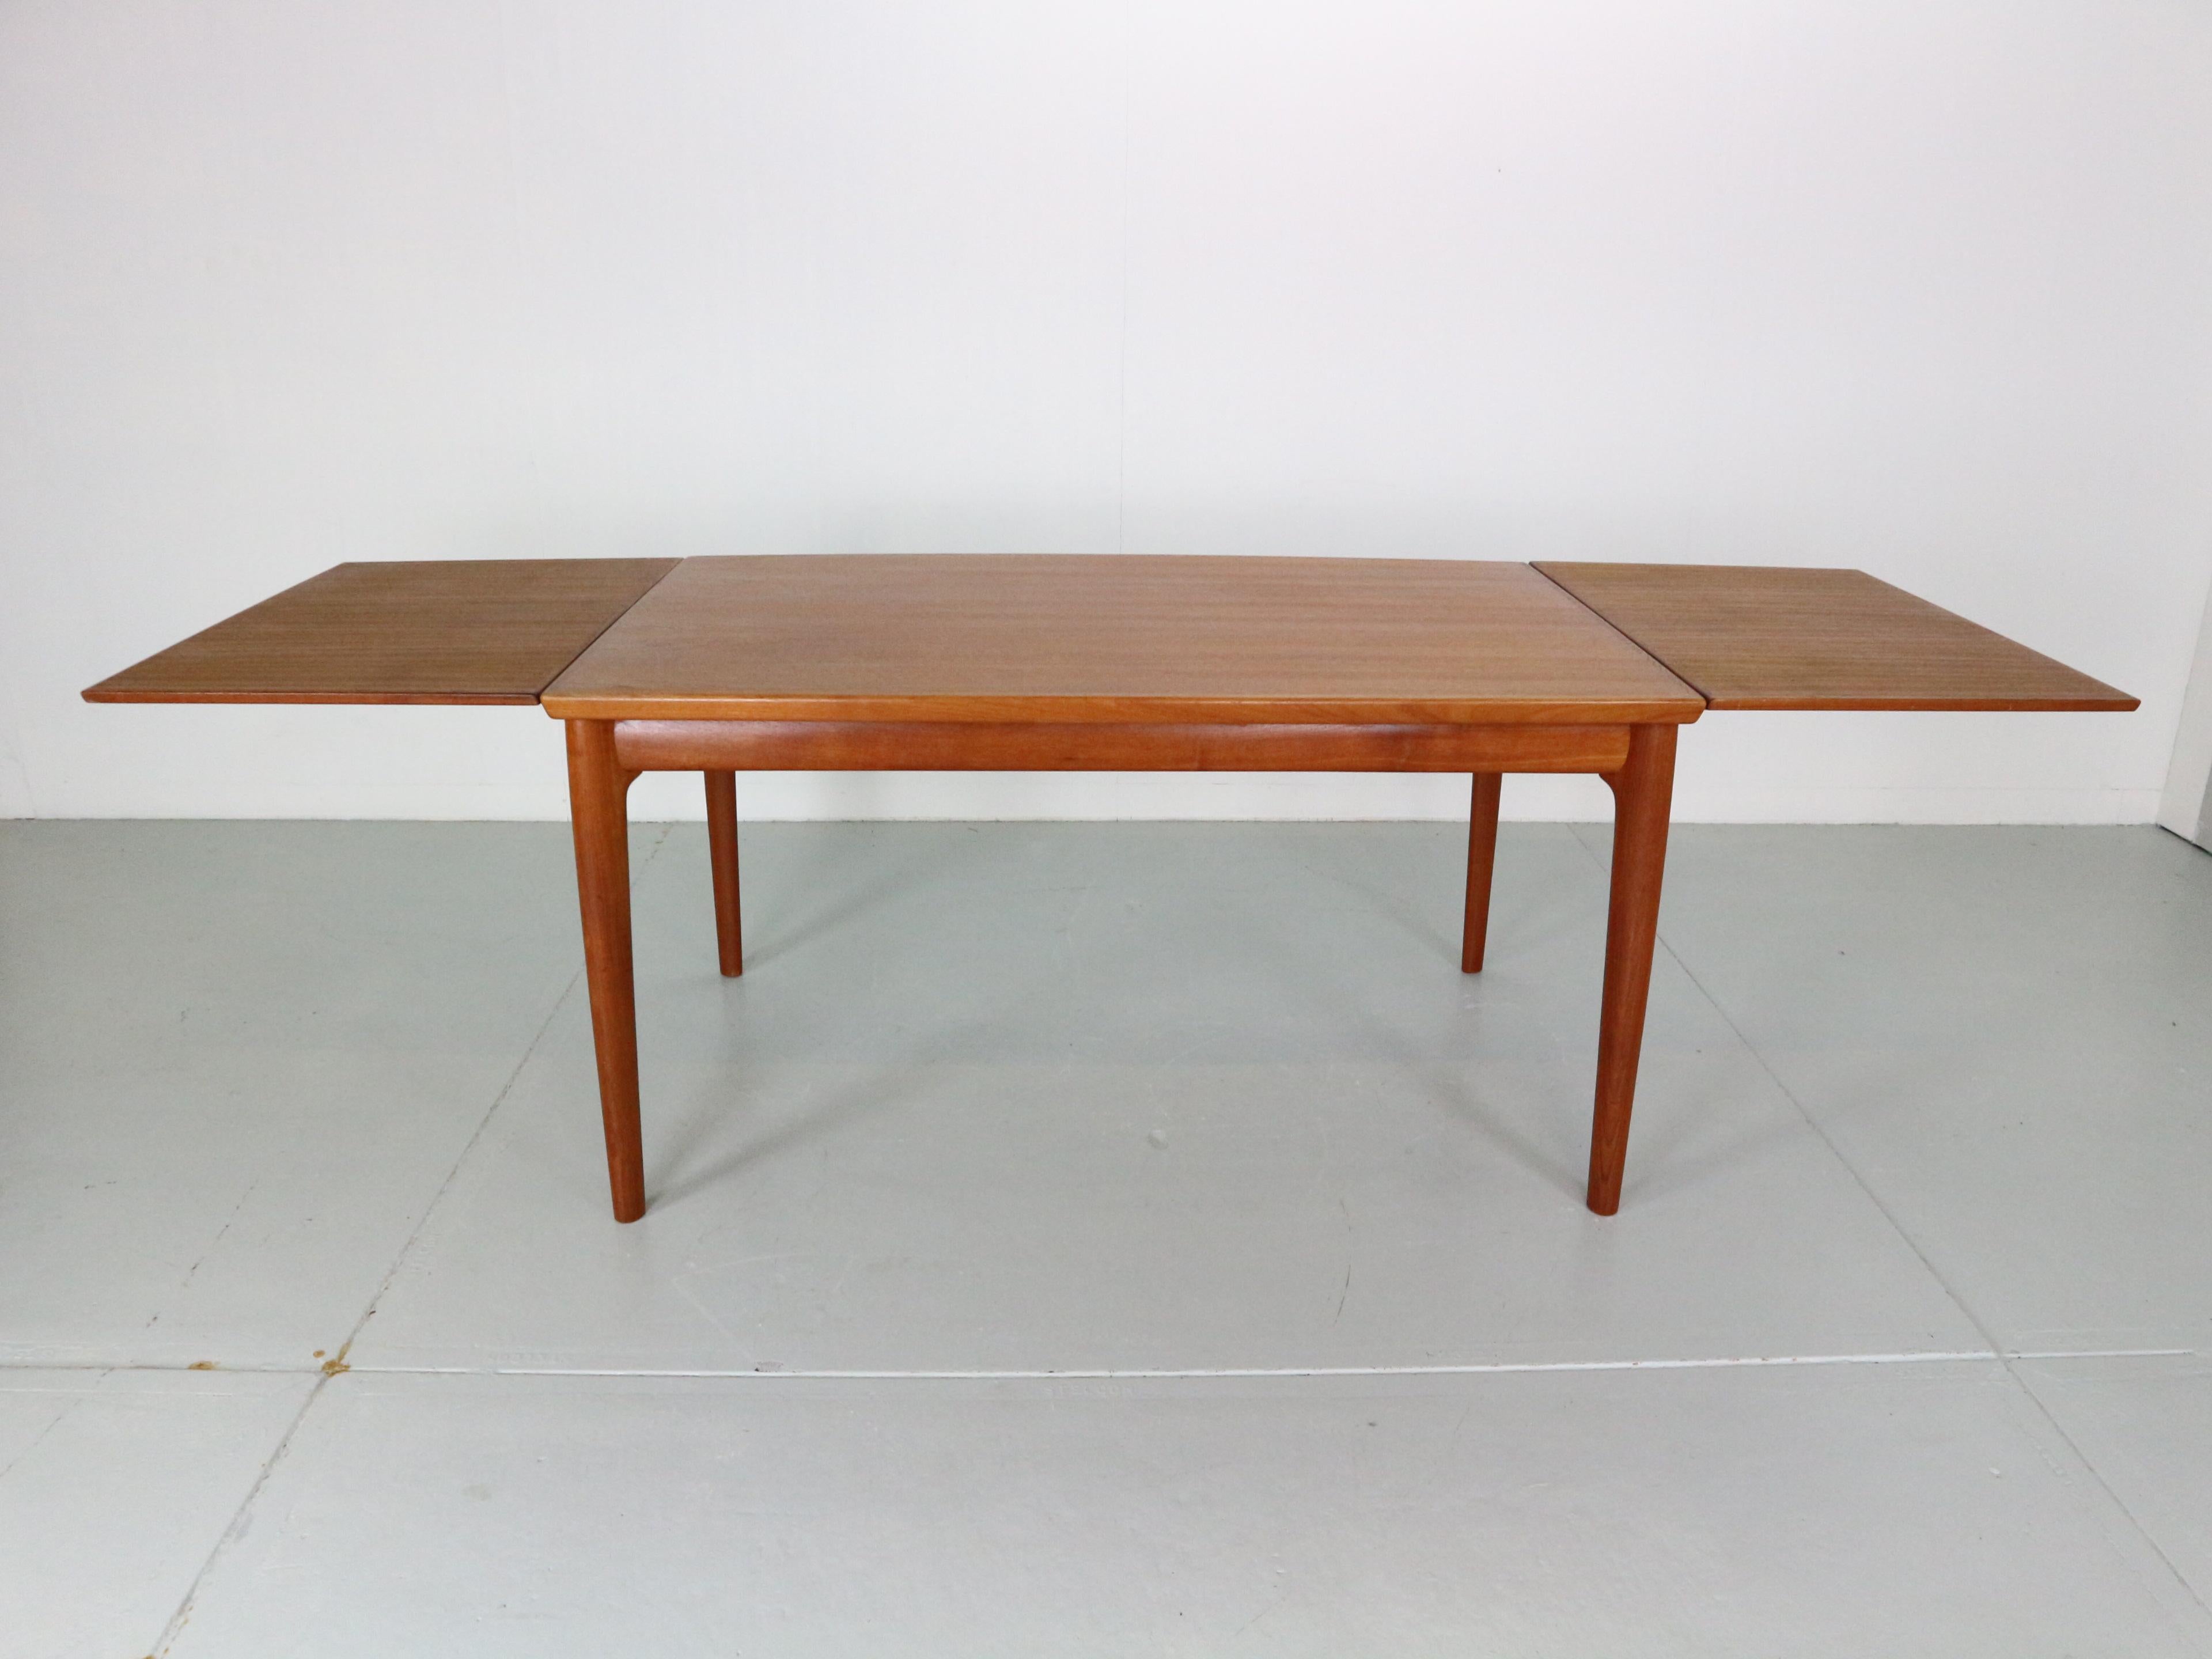 This teak extendable dining table have been designed in the 1960s by the leading Danish designer Greta Jalk and manufactured for Glostrup Møbelfabrik.

The table is characterized by a very high quality of workmanship and thoughtful solutions, an